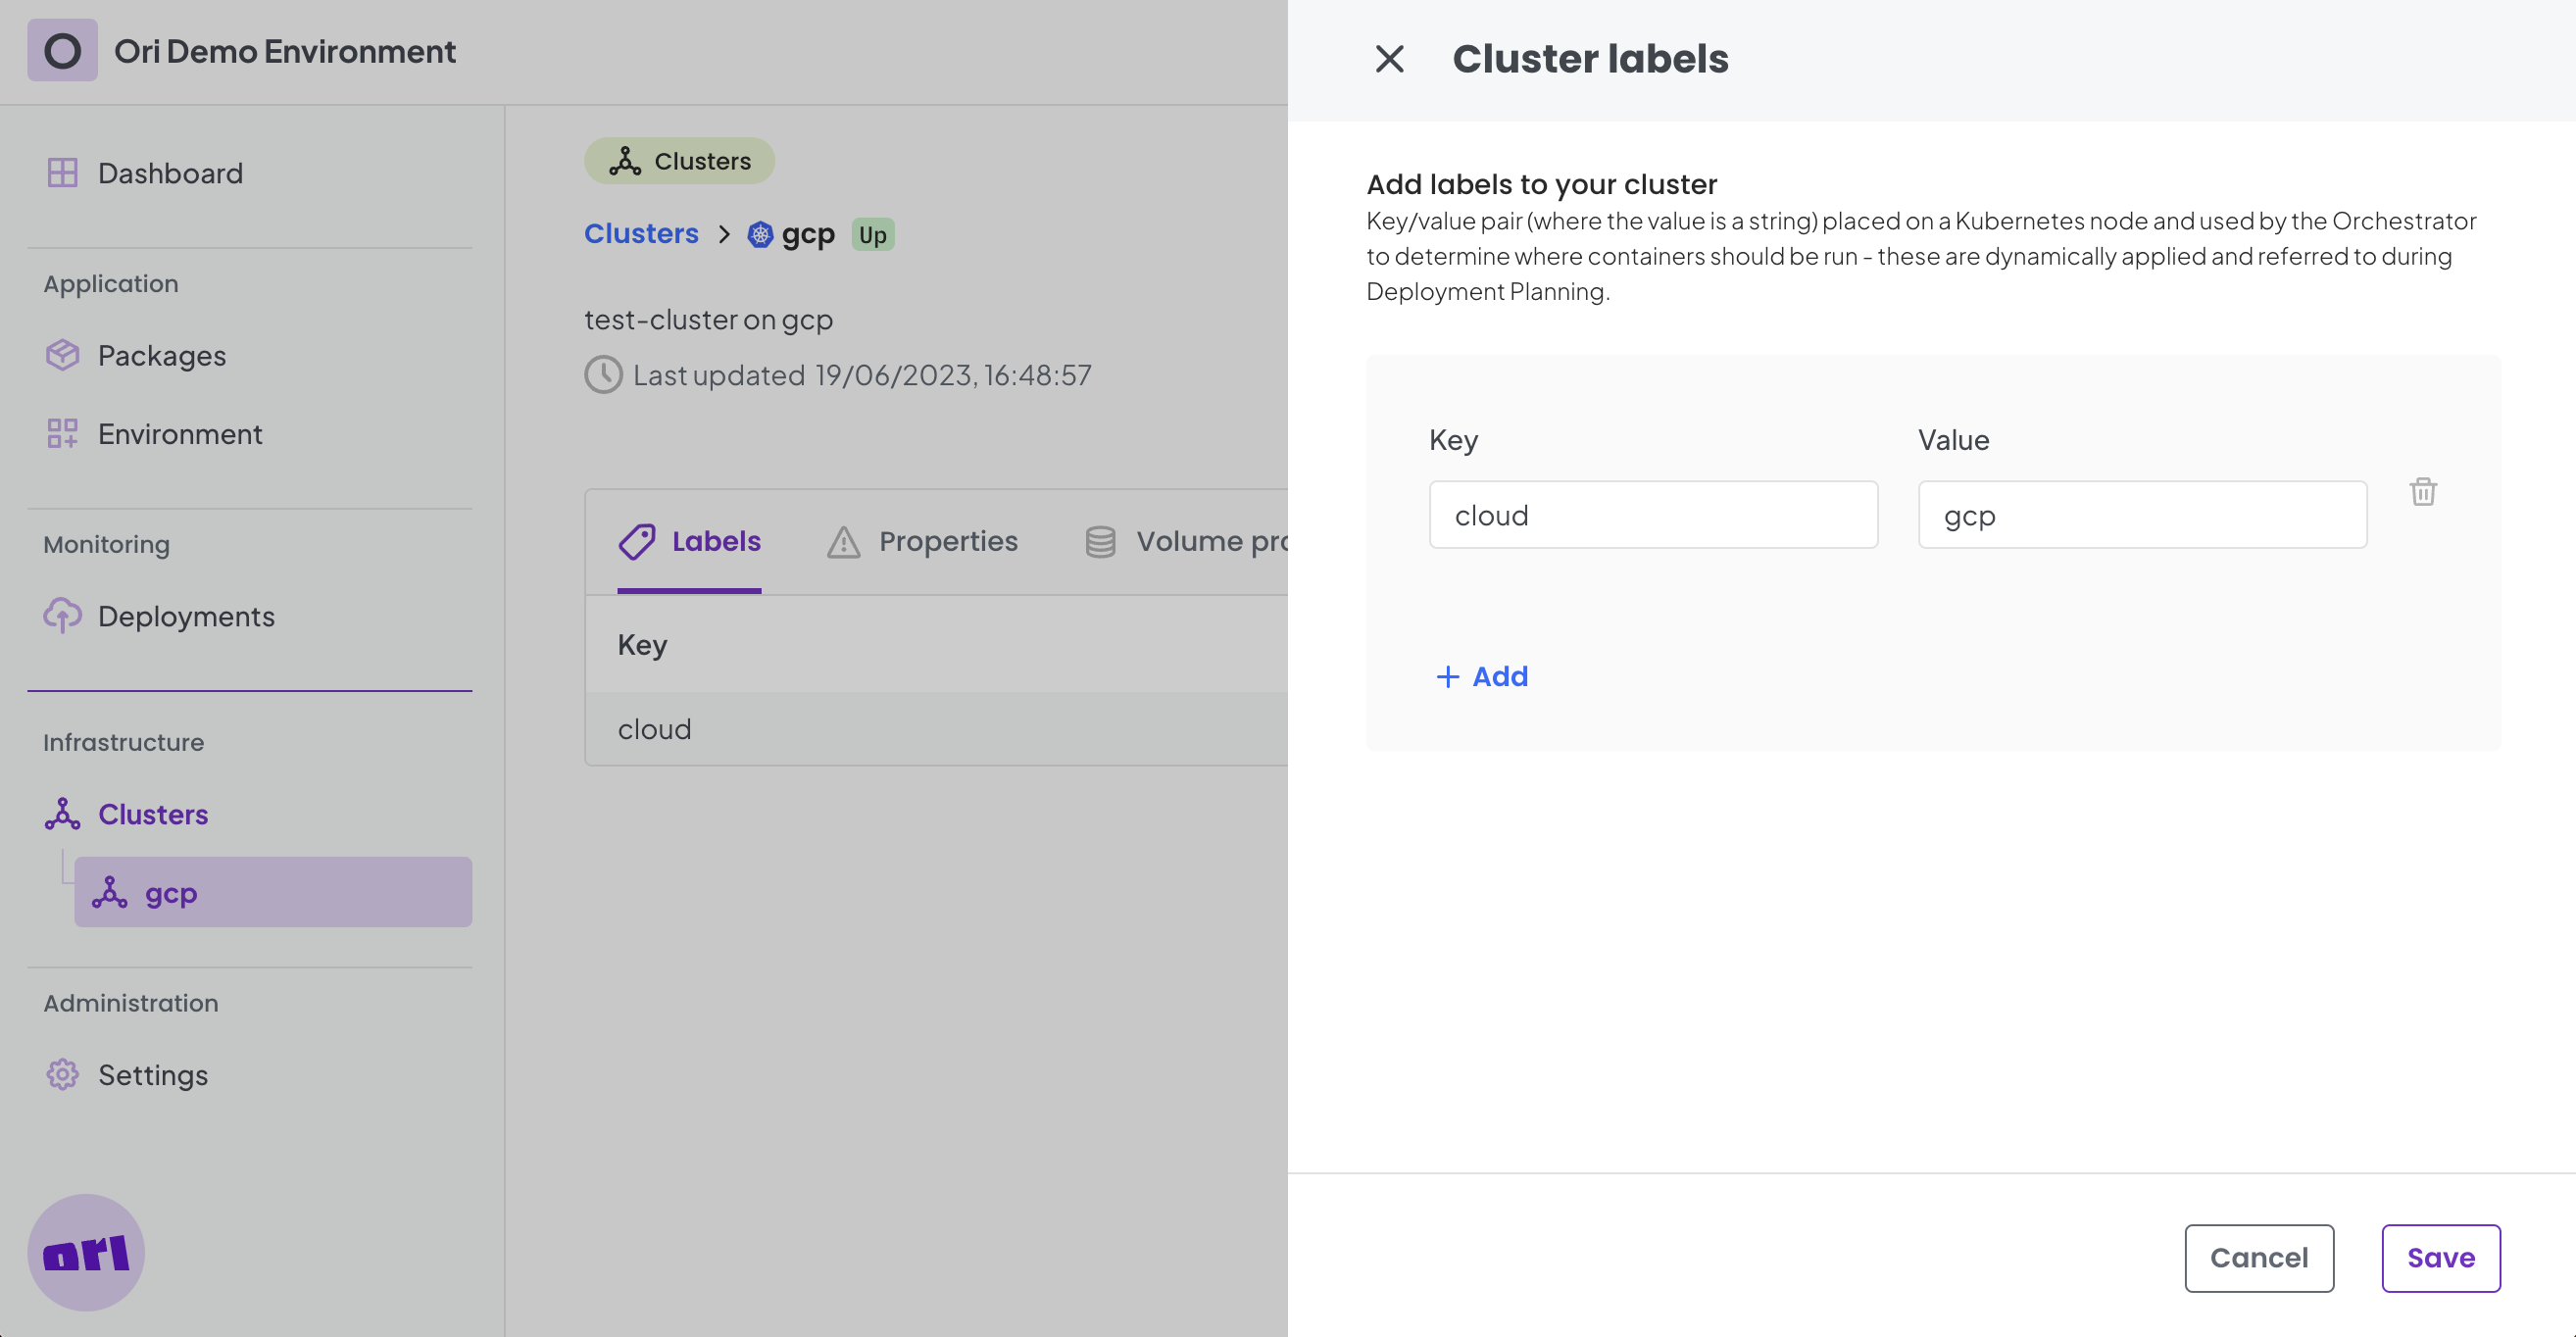 Assign Labels to Cluster